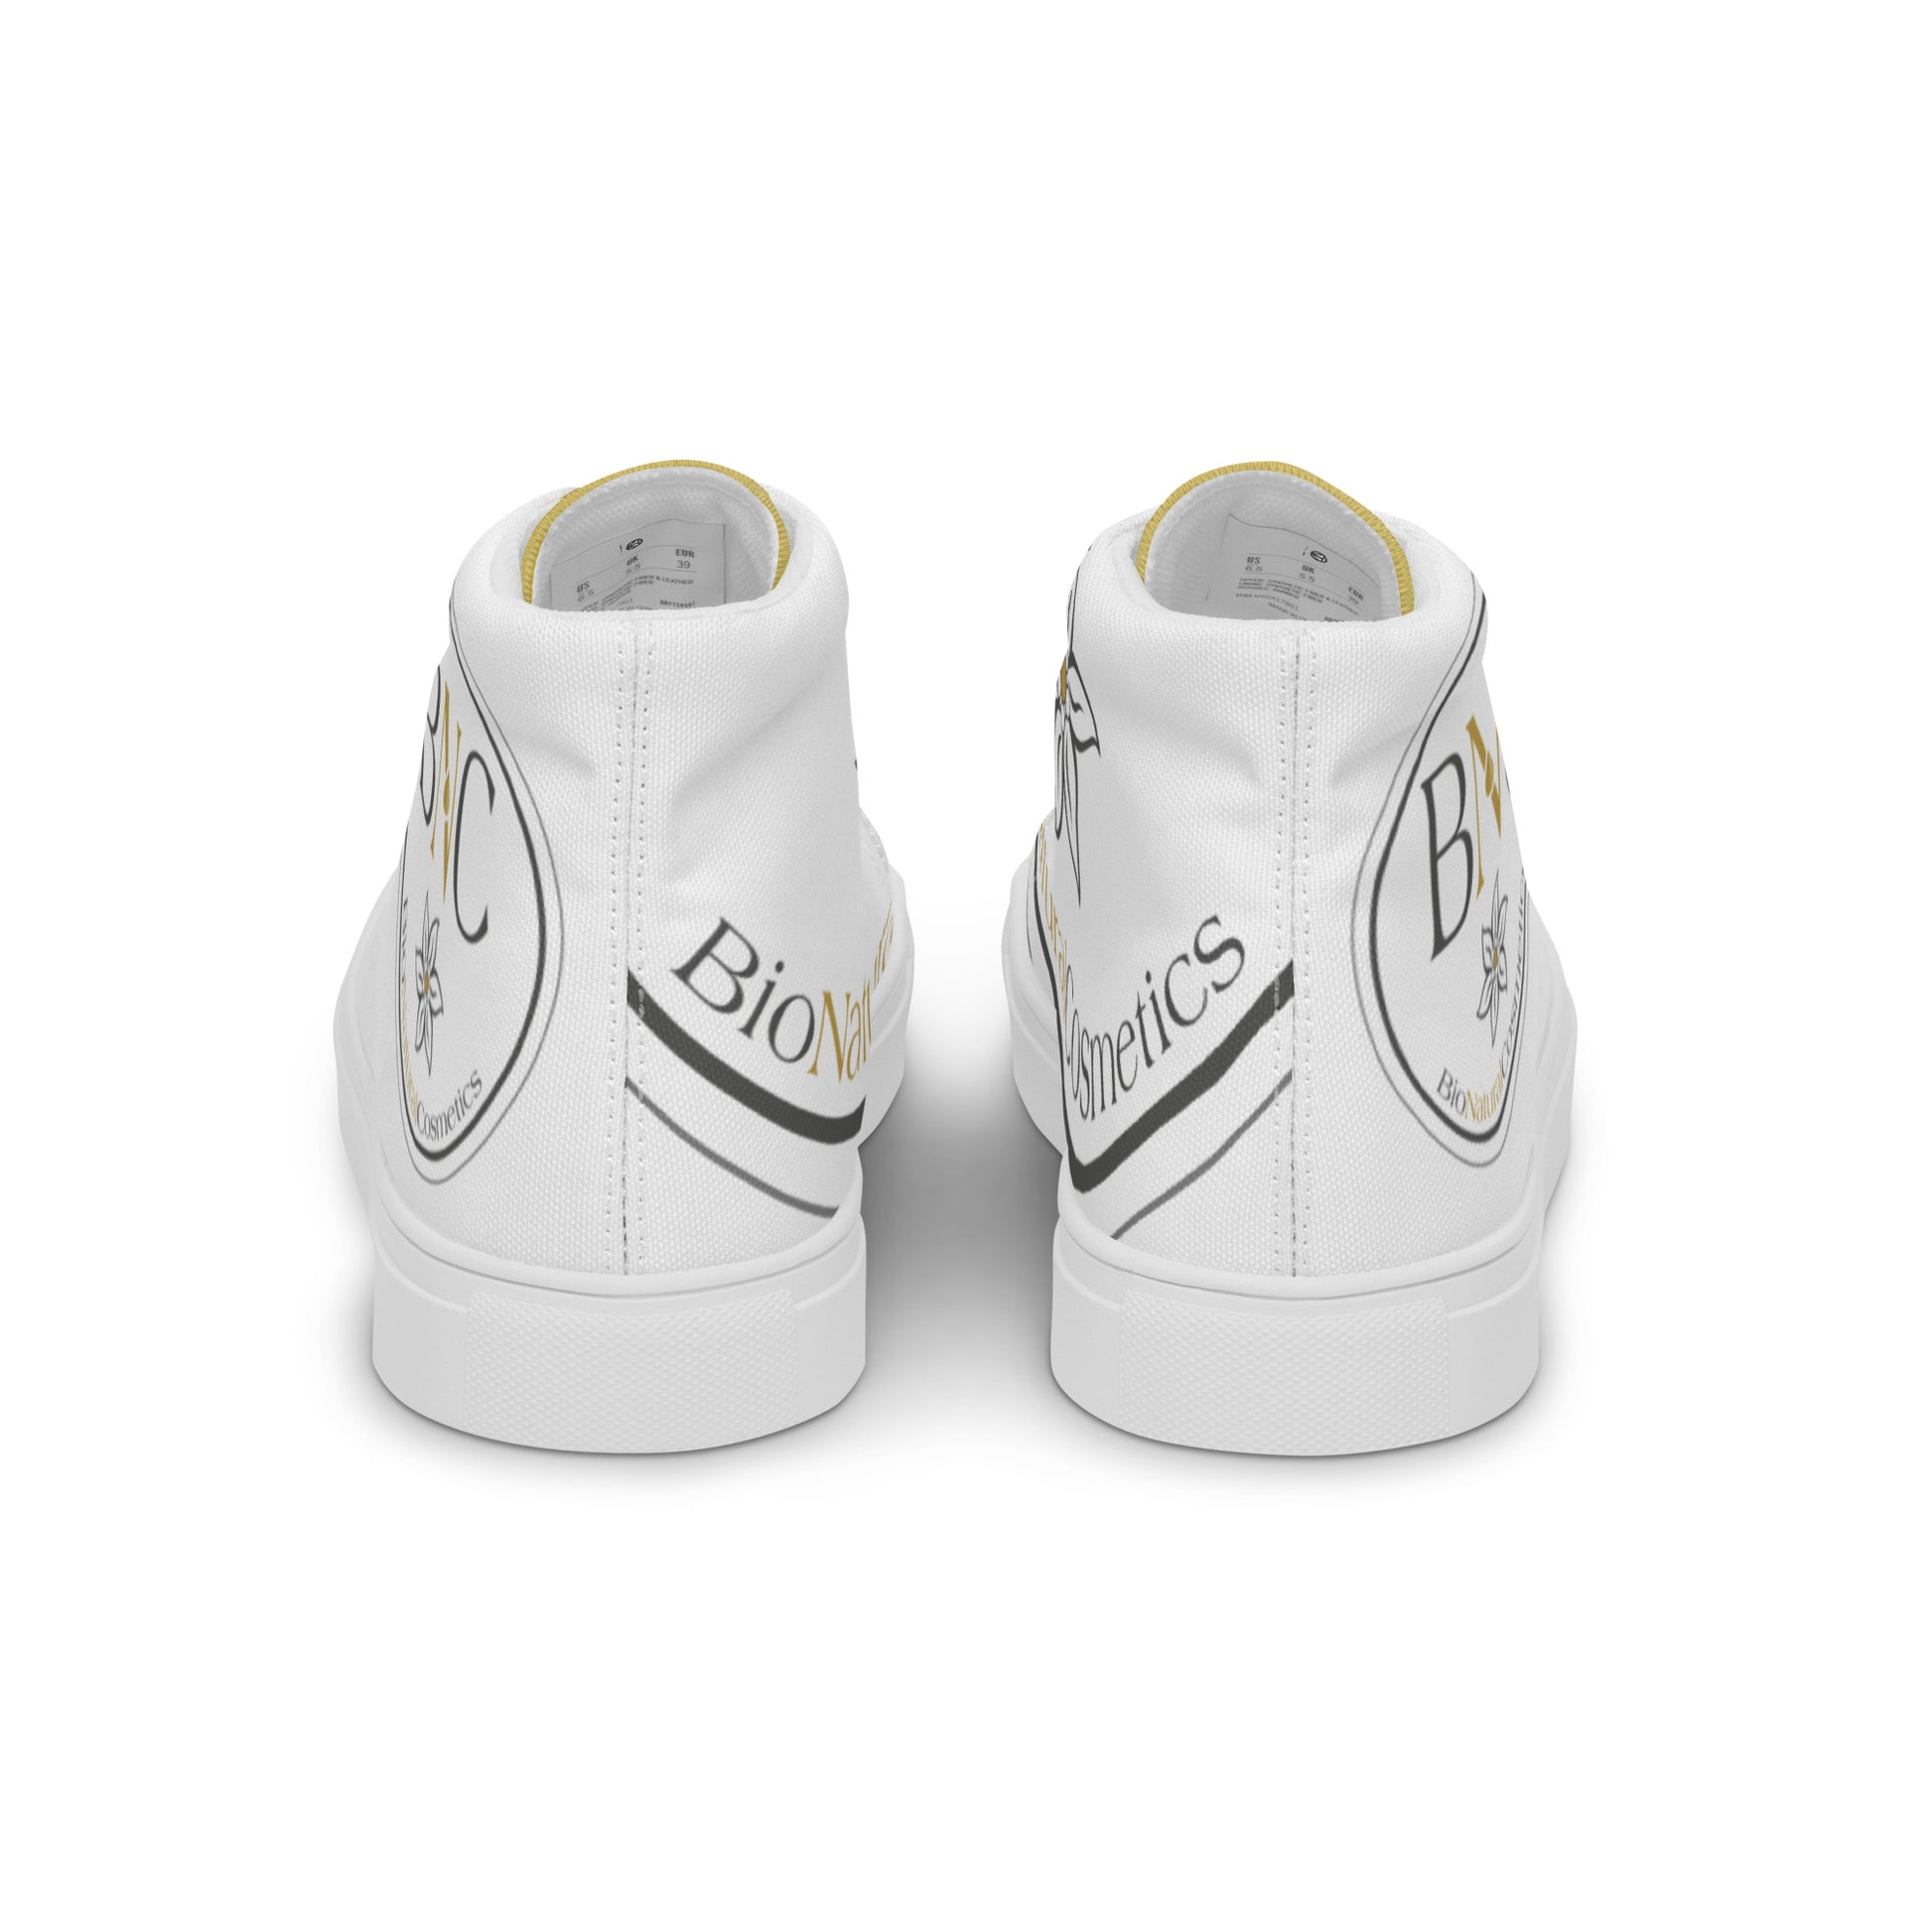 TIME OF VIBES - Women’s High Sneaker BNC - €190.00